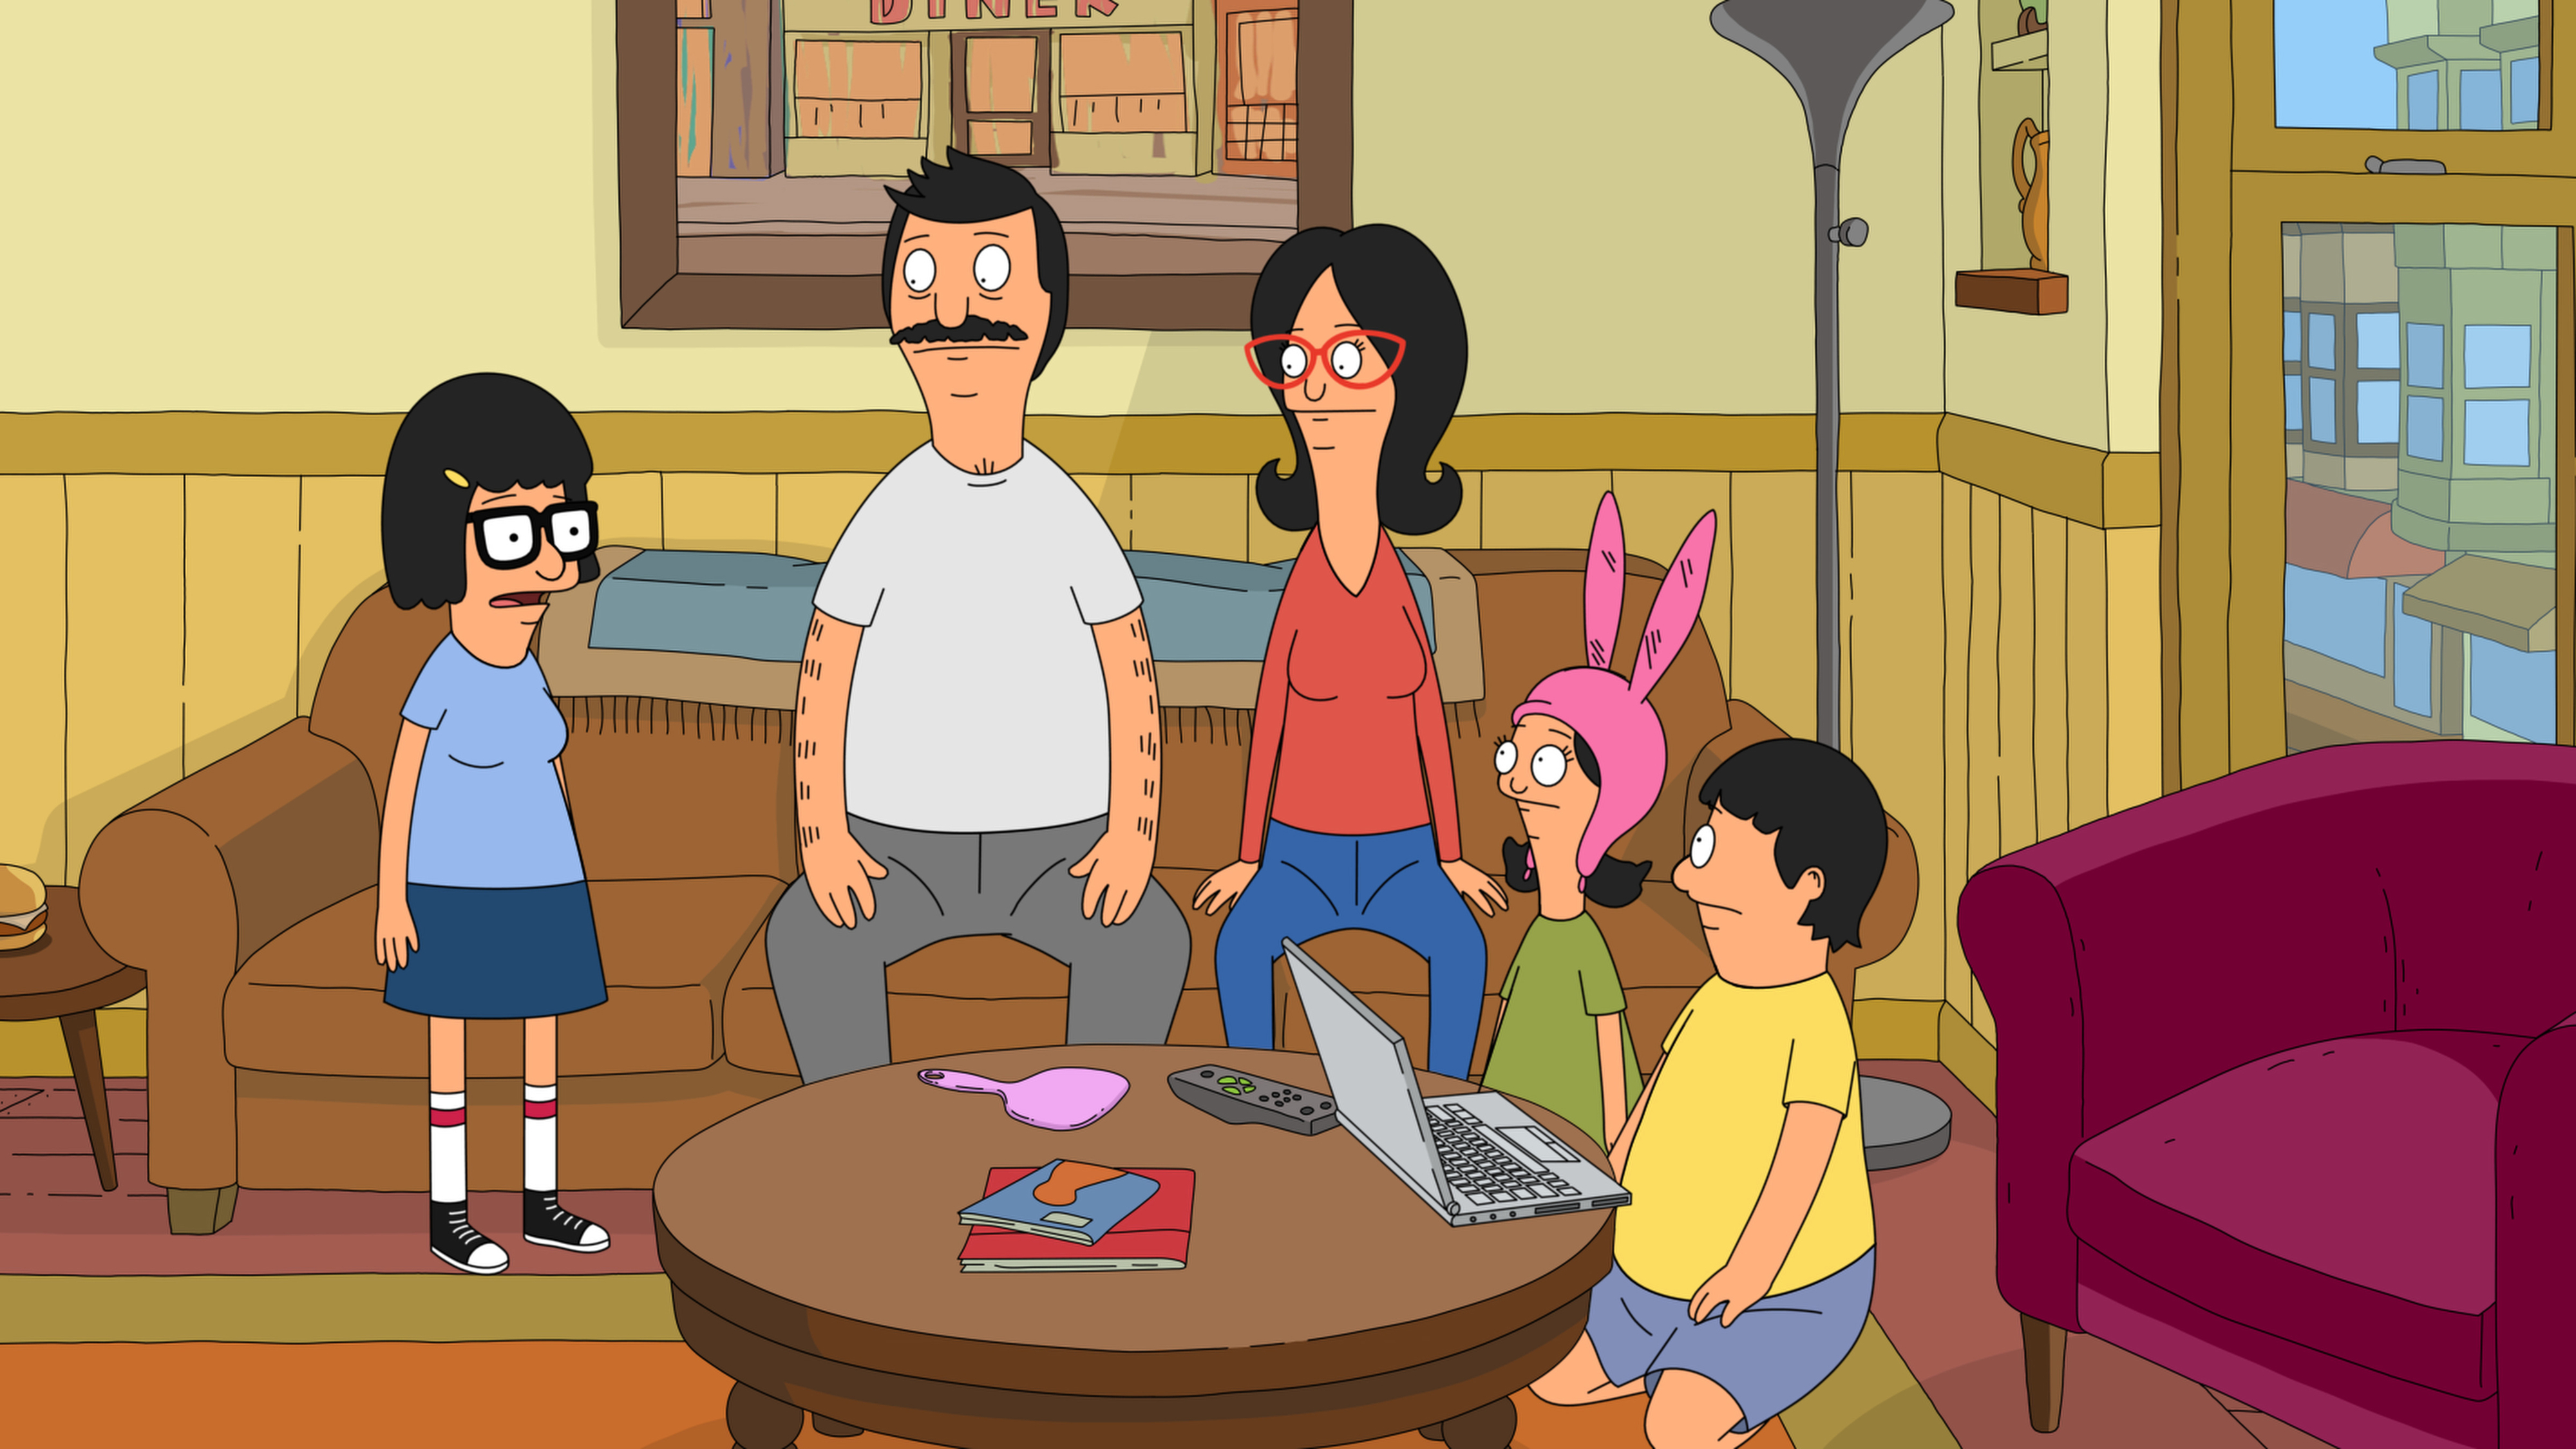 Animated characters from &quot;Bob&#x27;s Burgers,&quot; including Bob, Linda, Tina, Gene, and Louise, in their living room